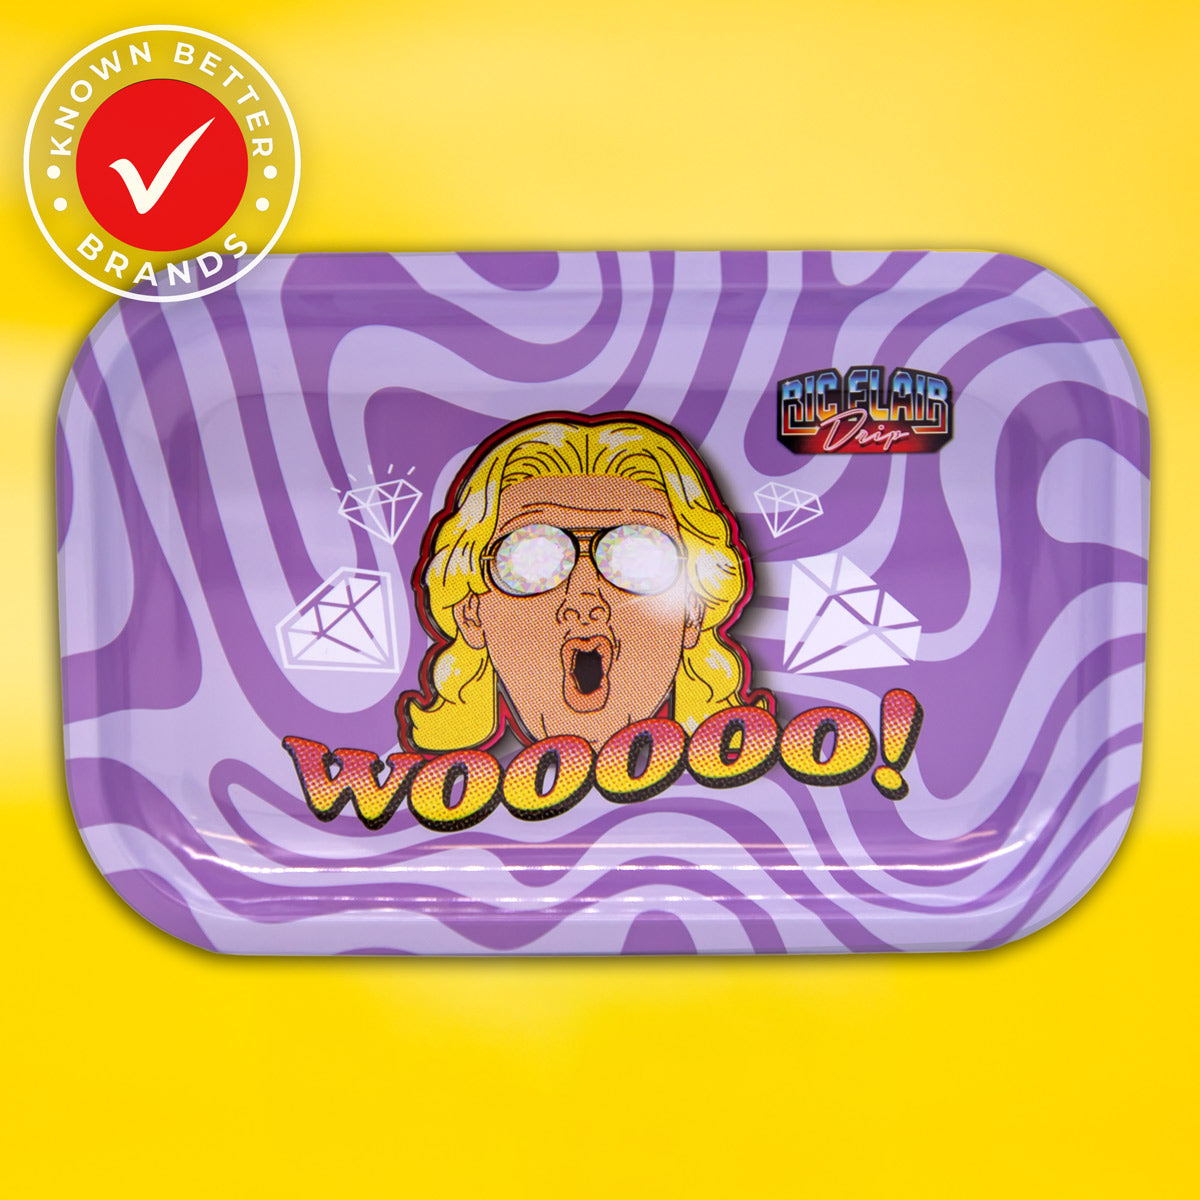 WOOOOO! Rolling Tray – Ric Flair Drip. Nature Boy charisma, exclusively from Known Better Brands. Enhance your sesh with Big Ric Energy! Official RFD Product with multiple size options.